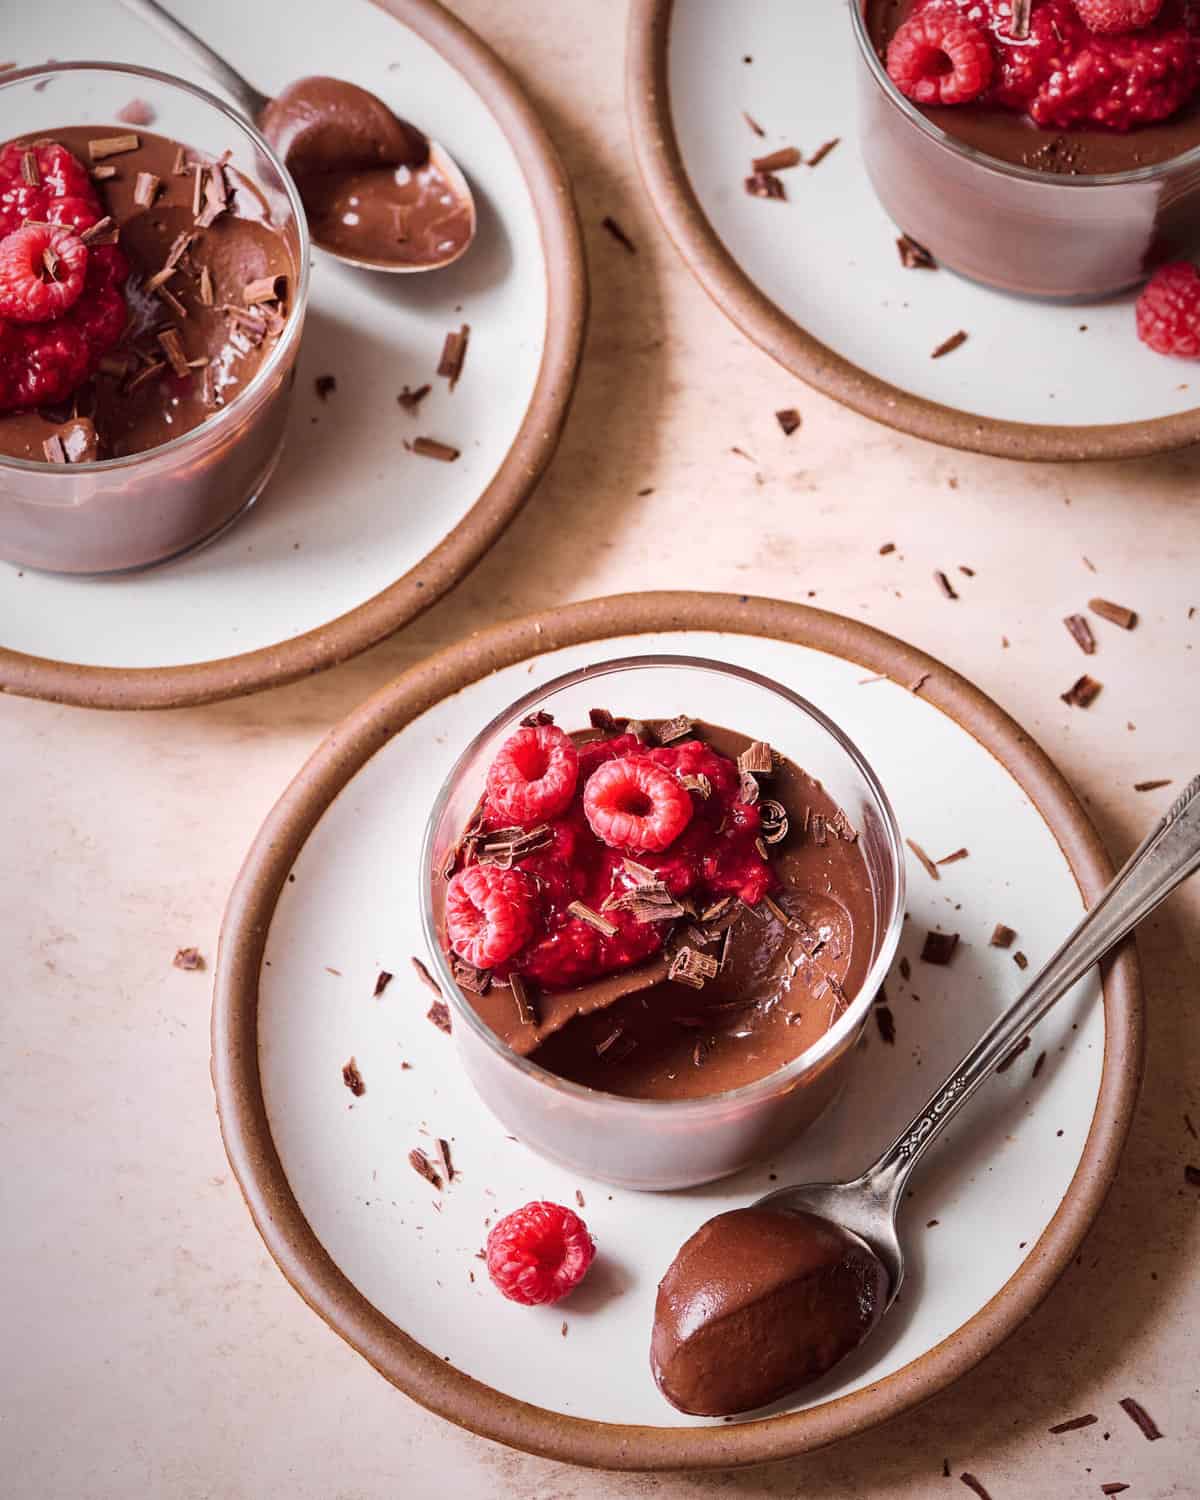 Three ramekins of chocolate mousse with raspberry compote and raspberries on a white plate.